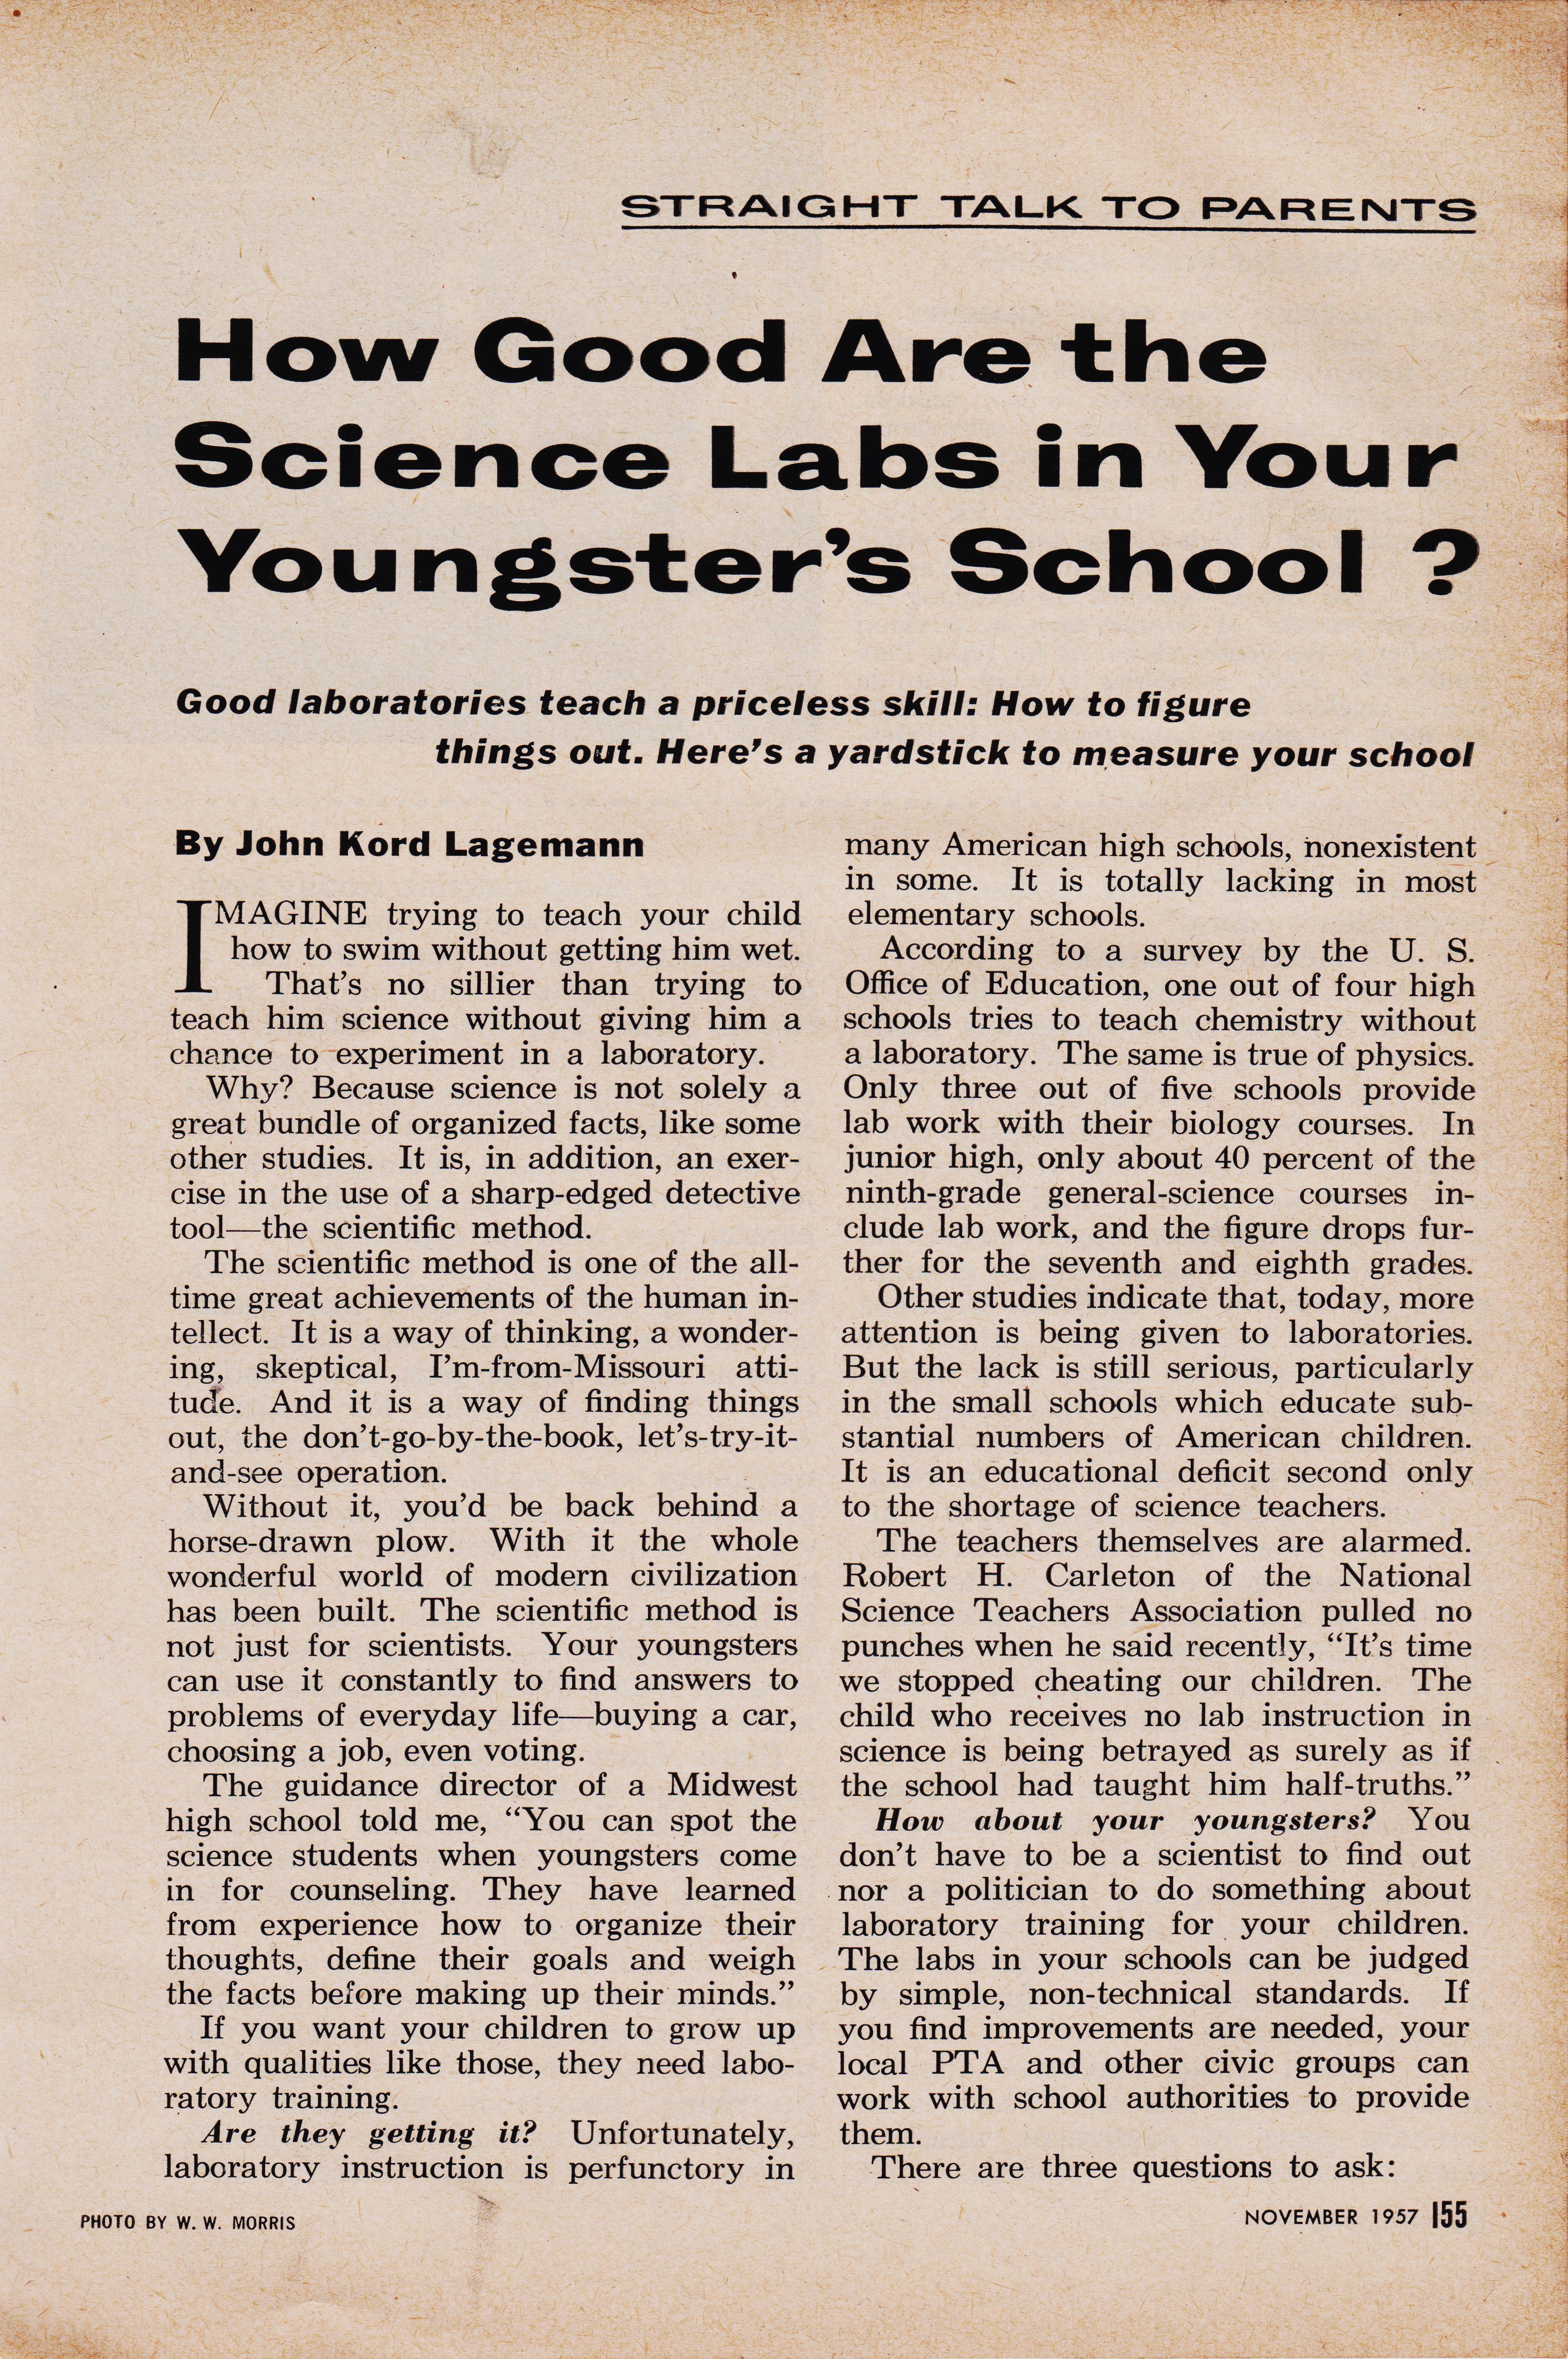 https://www.antiquemachinery.com/images-Popular-Science/Scientific-American-1958-pg-155- how-good -are-the-Science-Labs-in-your-Youngsters-School-November-1958-.jpeg